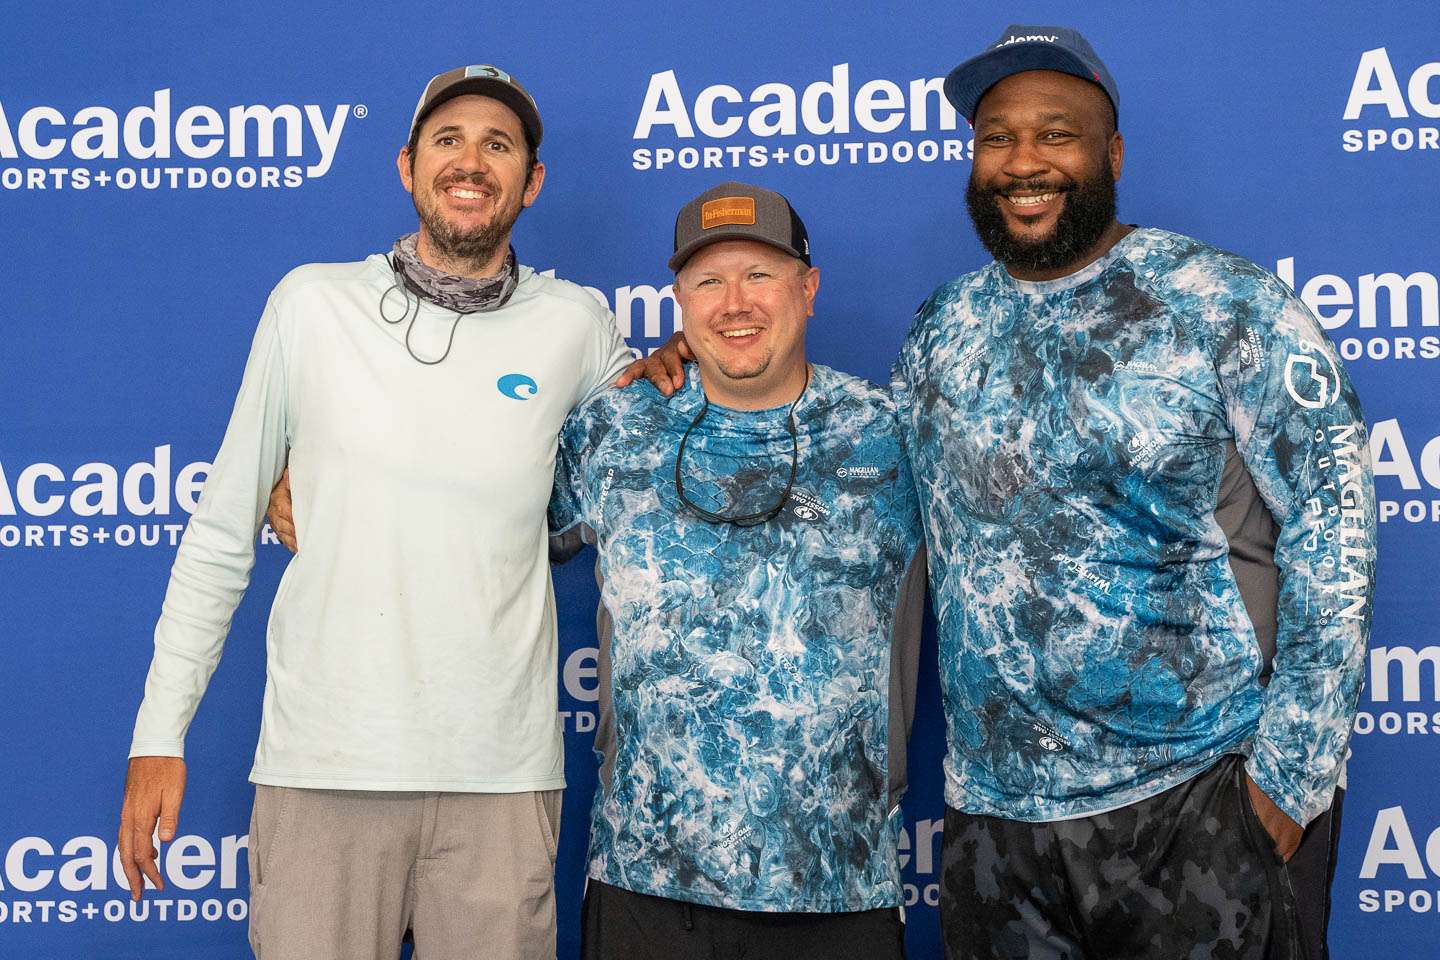 Marcus Spears is known for having a great career at LSU and the NFL as a defensive end, and appearing on plenty of ESPN shows. But he's also a big outdoorsman. He fished with Todd Ceisner and Brandon Dickenson. 